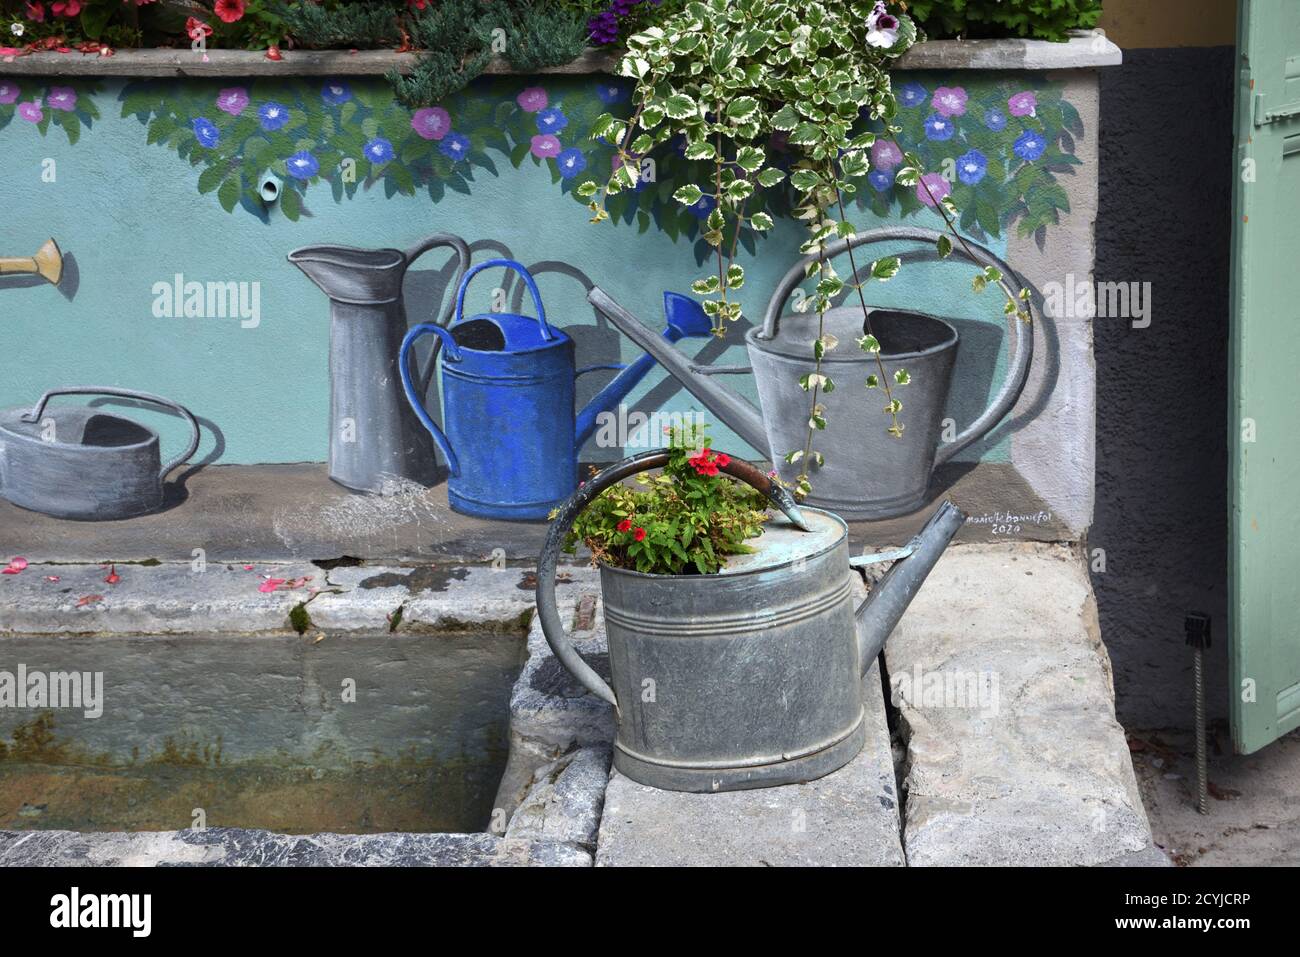 Vintage or Old Metal Watering Can & Painted Watering Cans Decorating Village Fountain or Street Fountain Colmars-les-Alpes Provence France Stock Photo